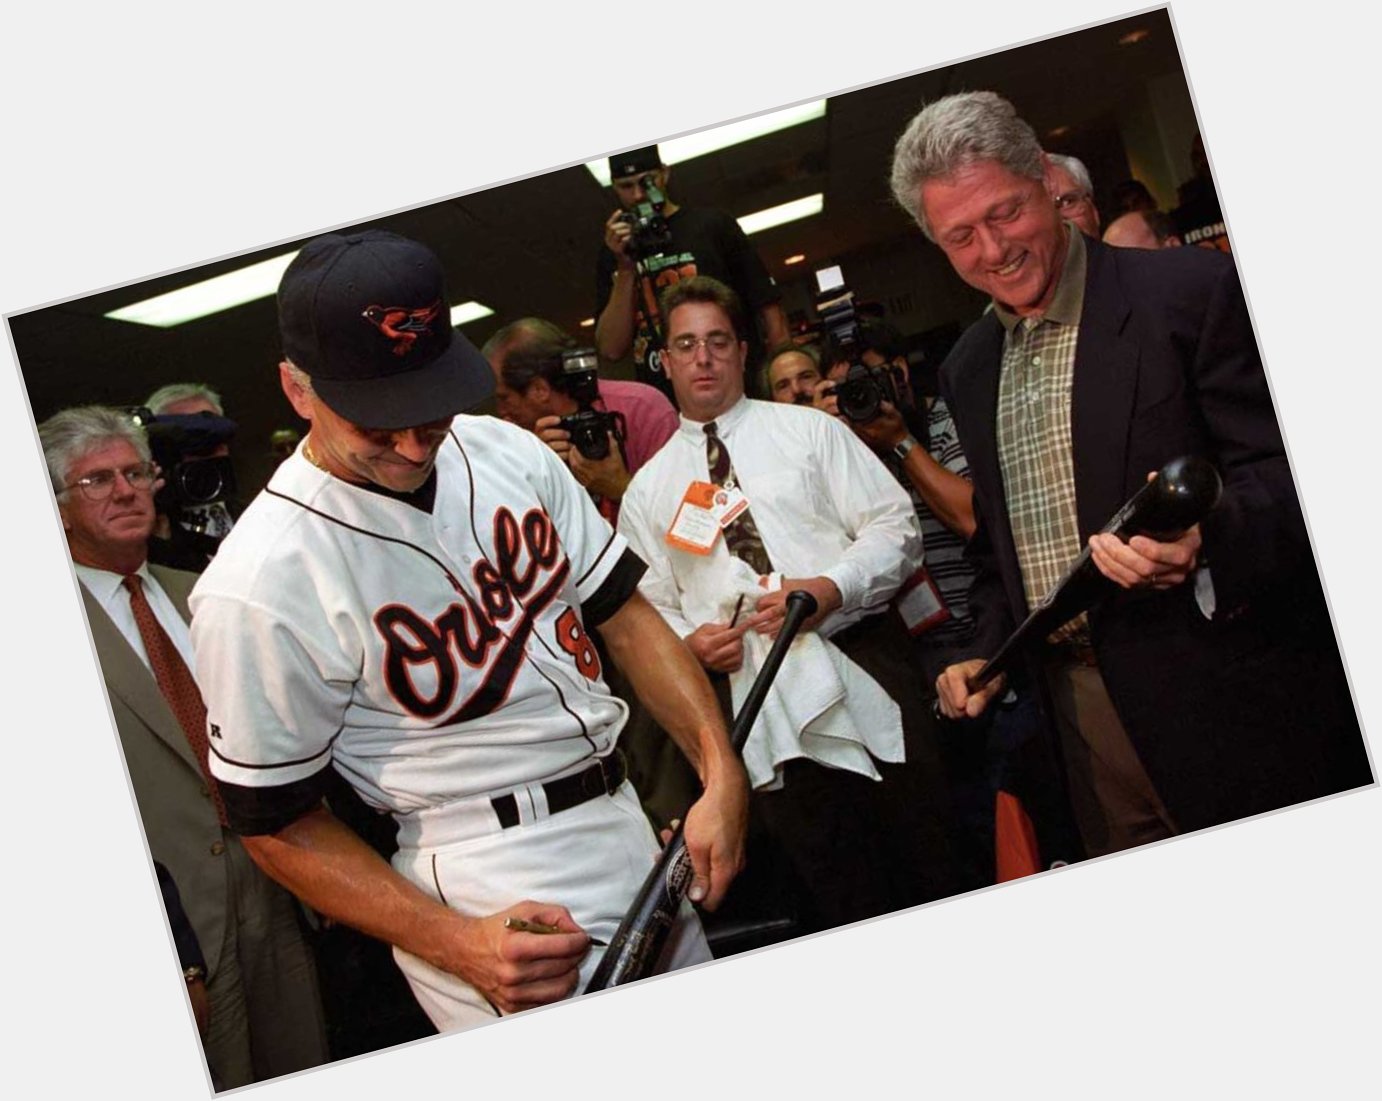 Happy birthday today to some guy named Ripken, signing an autograph for President Bill Clinton    